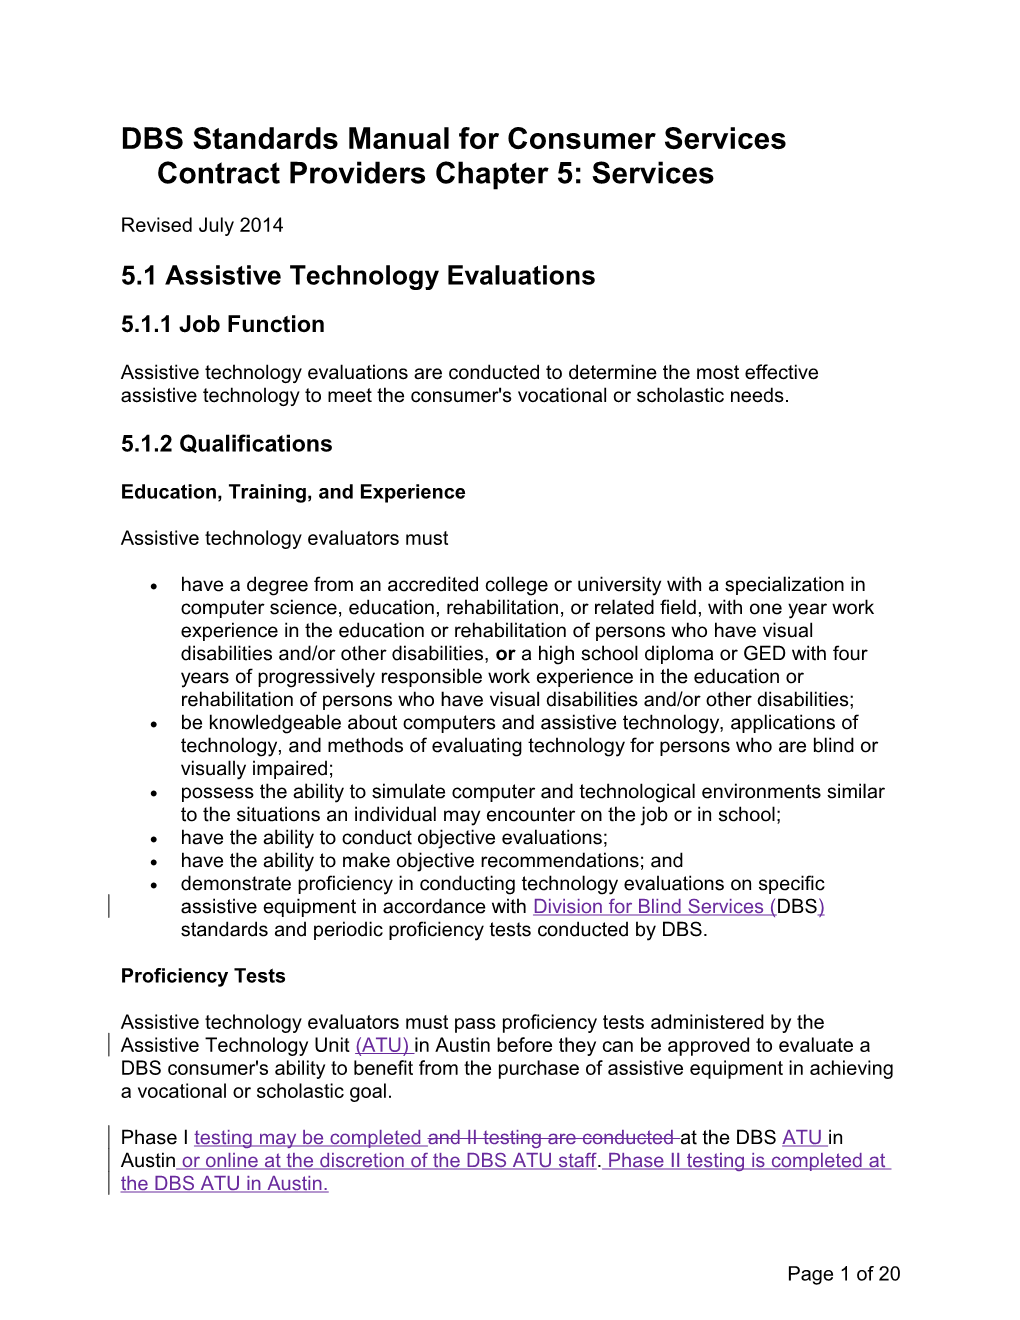 DBS Standards Manual for Consumer Services Contract Providers Chapter 5 Revisions, July 2014 s1